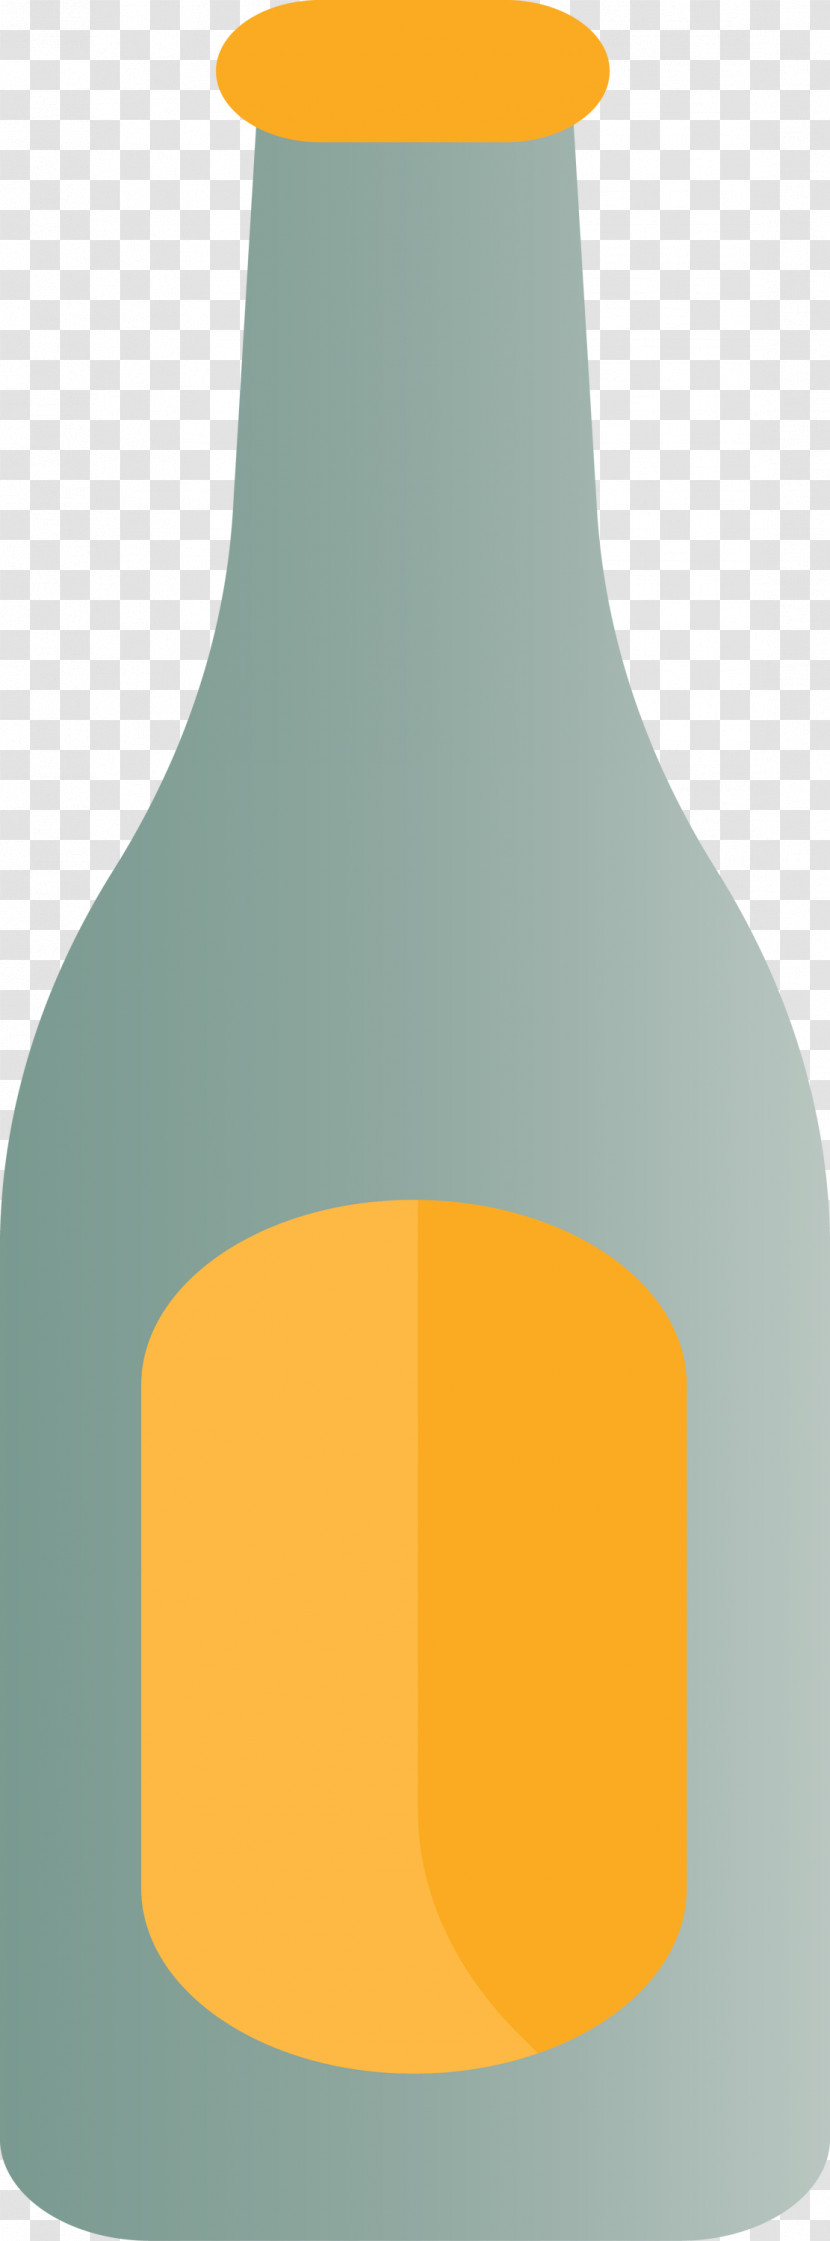 Glass Bottle Yellow Angle Glass Font Transparent PNG